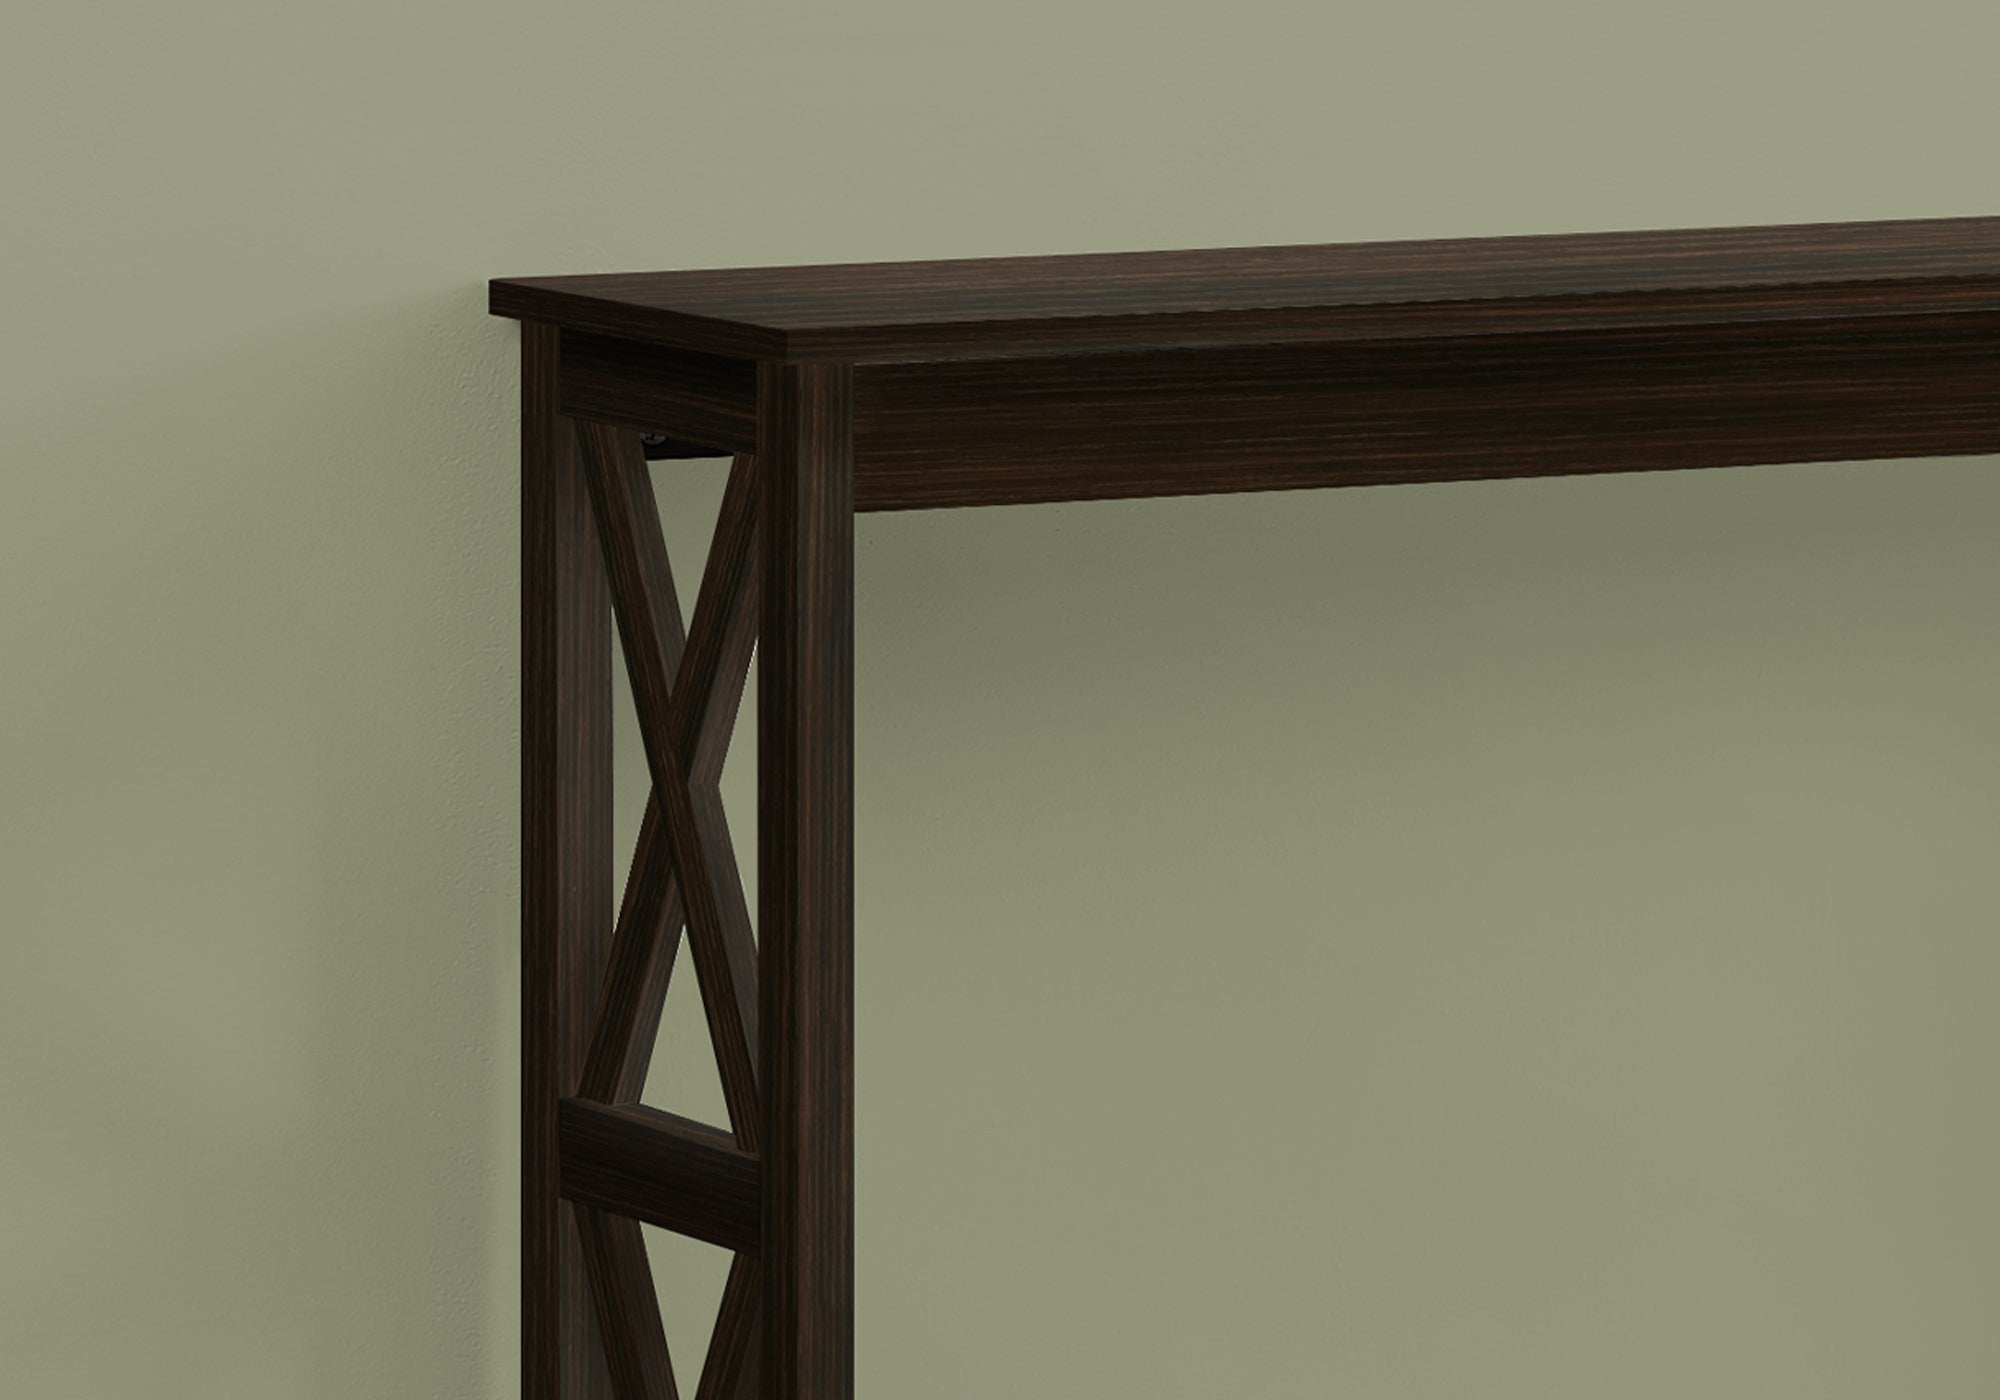 I 2790 - ACCENT TABLE - 48"L / ESPRESSO HALL CONSOLE BY MONARCH SPECIALTIES INC